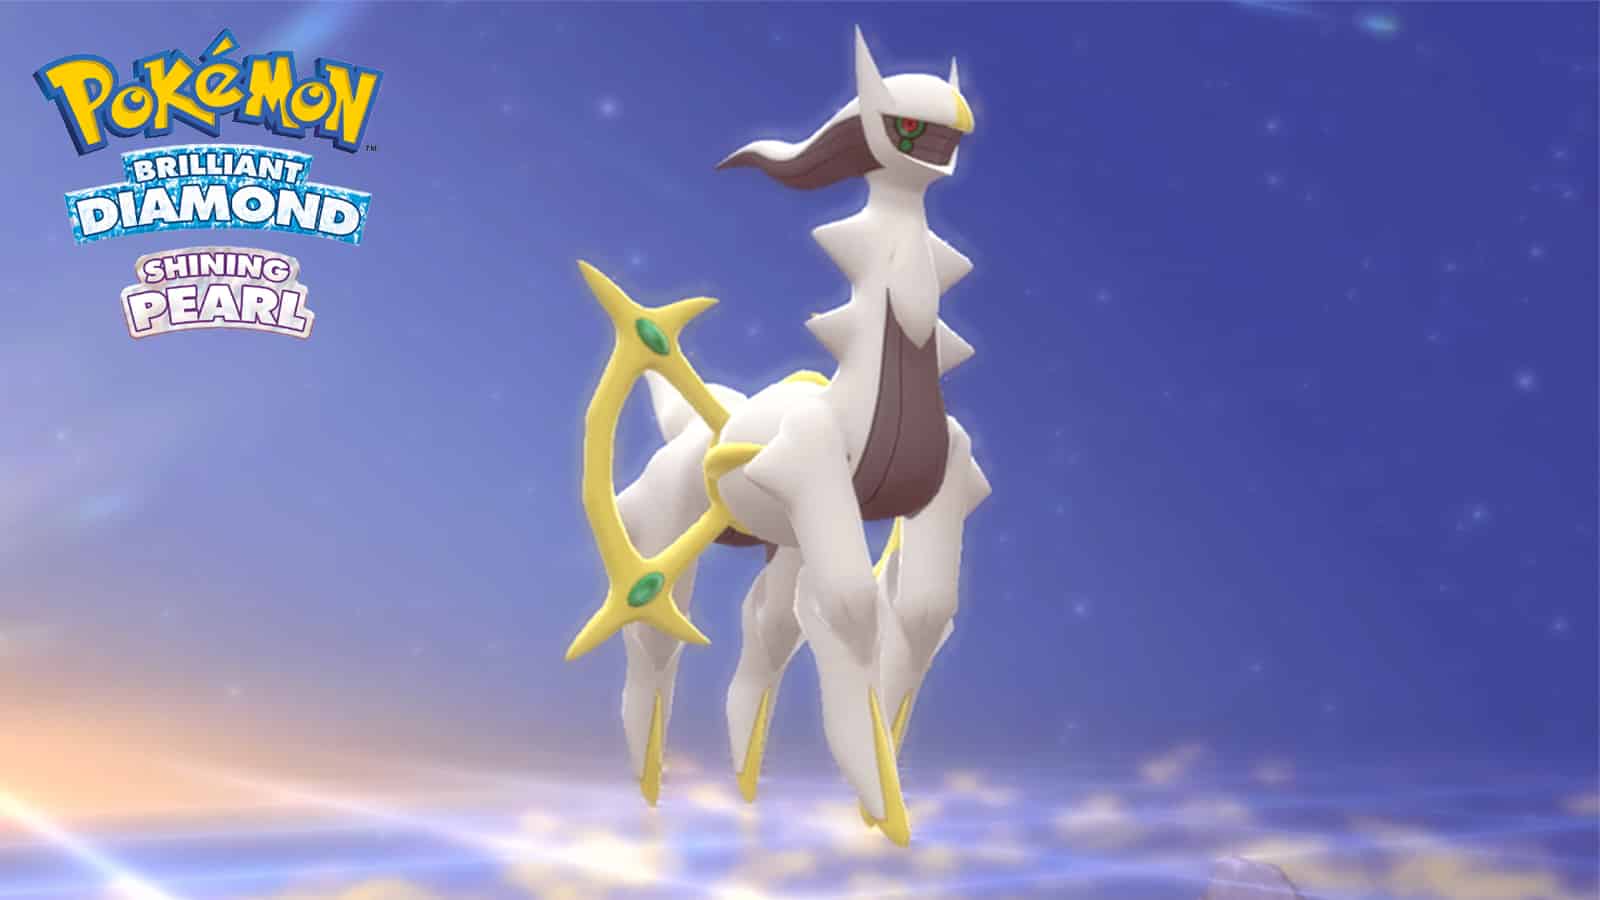 How to Get Arceus - Pokemon Diamond, Pearl and Platinum Guide - IGN